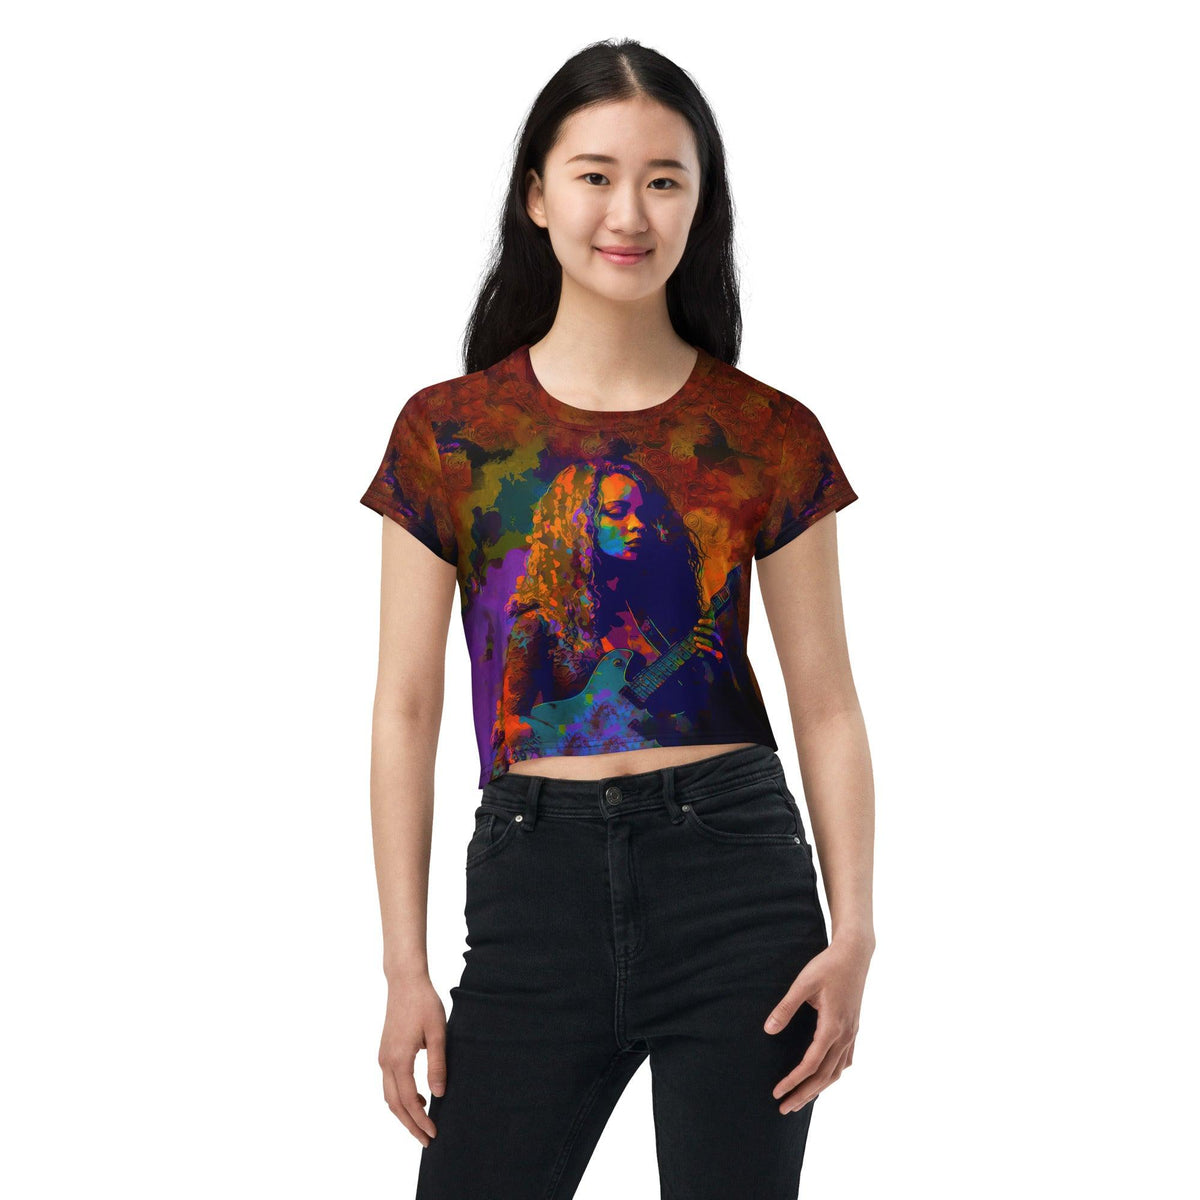 SurArt 130 all-over print crop tee front view.